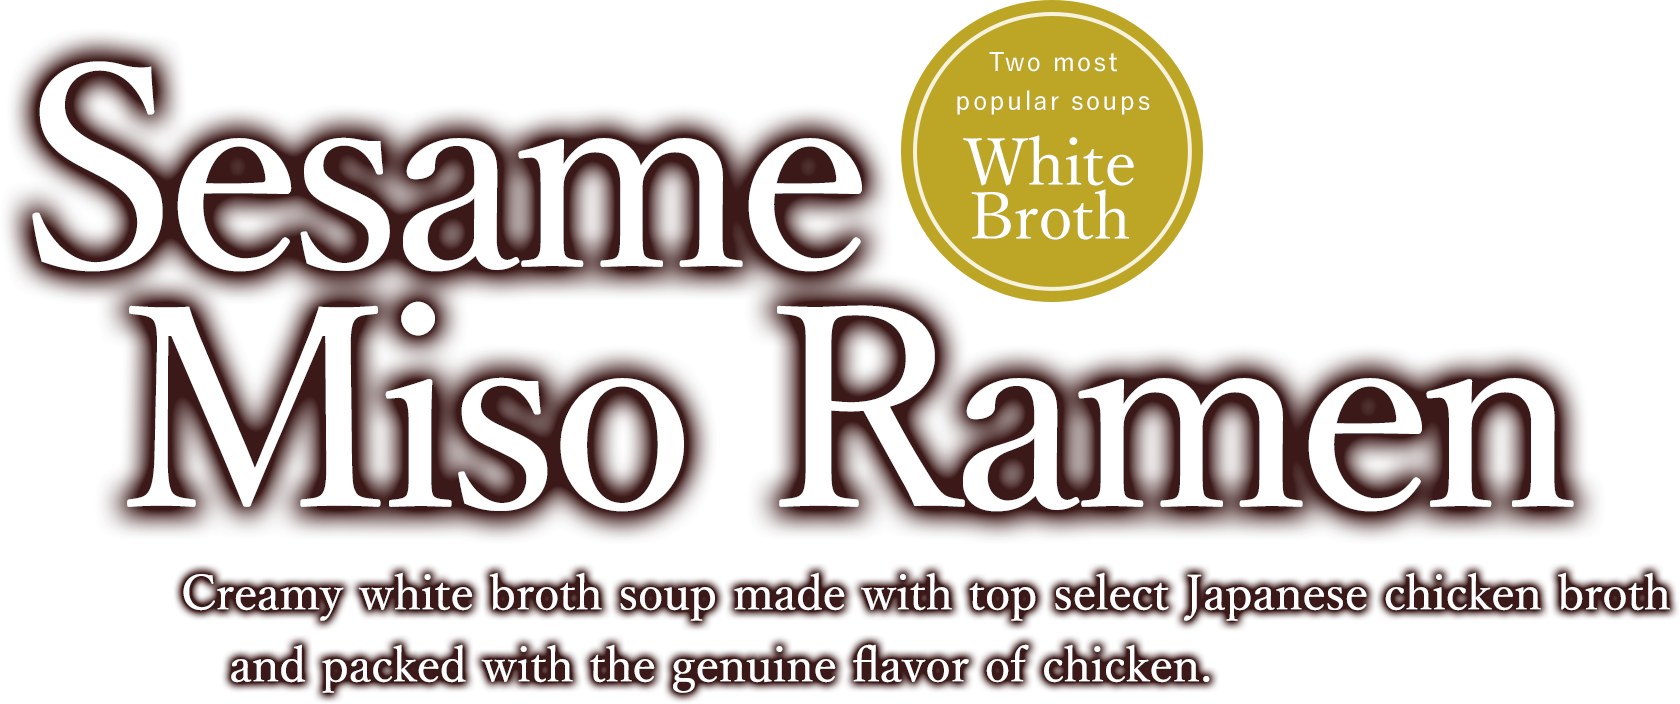 Sesame Miso Ramen Creamy white broth soup made with top select Japanese chicken broth and packed with the genuine flavor of chicken.